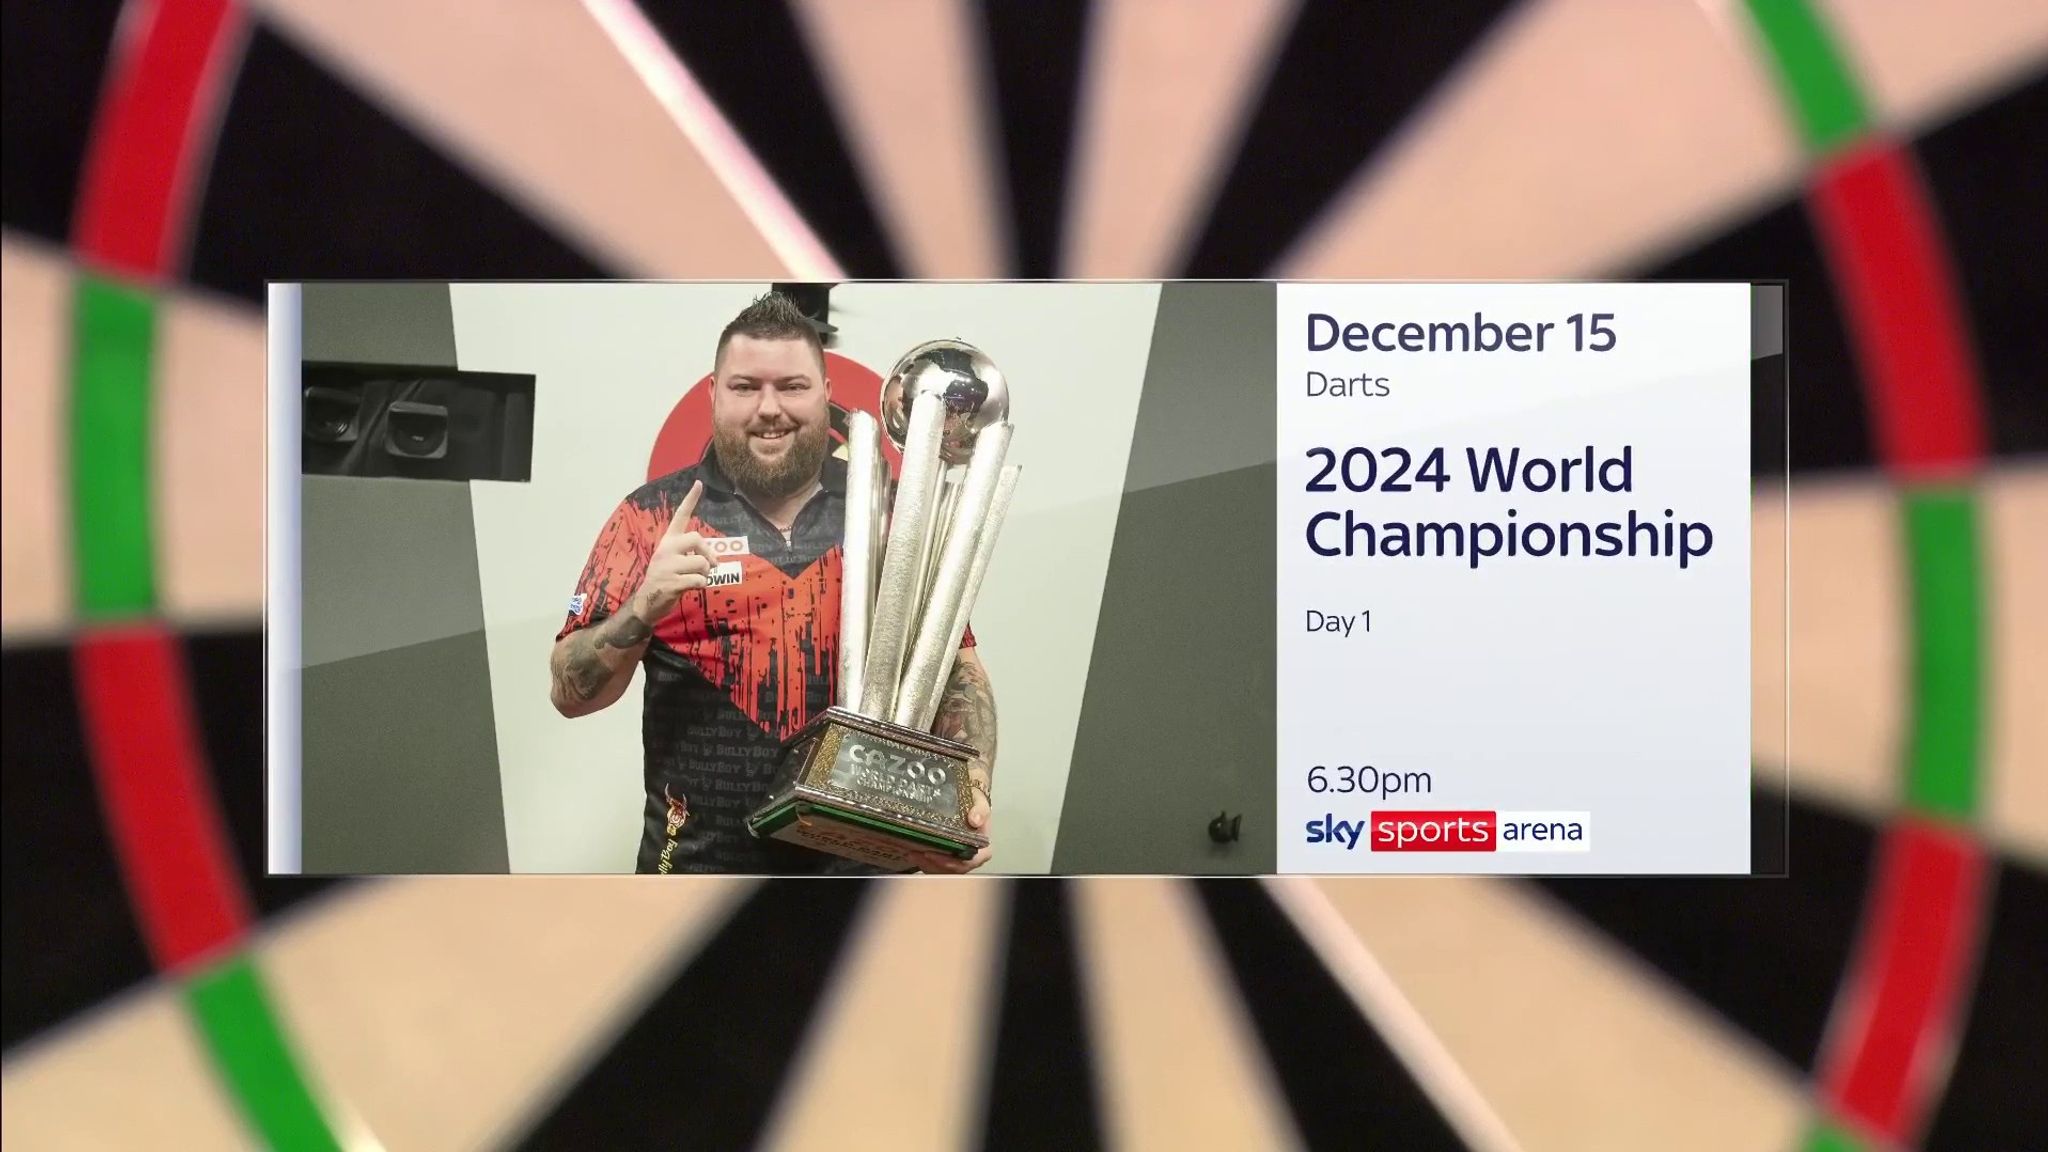 5 FAVOURITES FOR THE DARTS WORLD CHAMPIONSHIP 2024